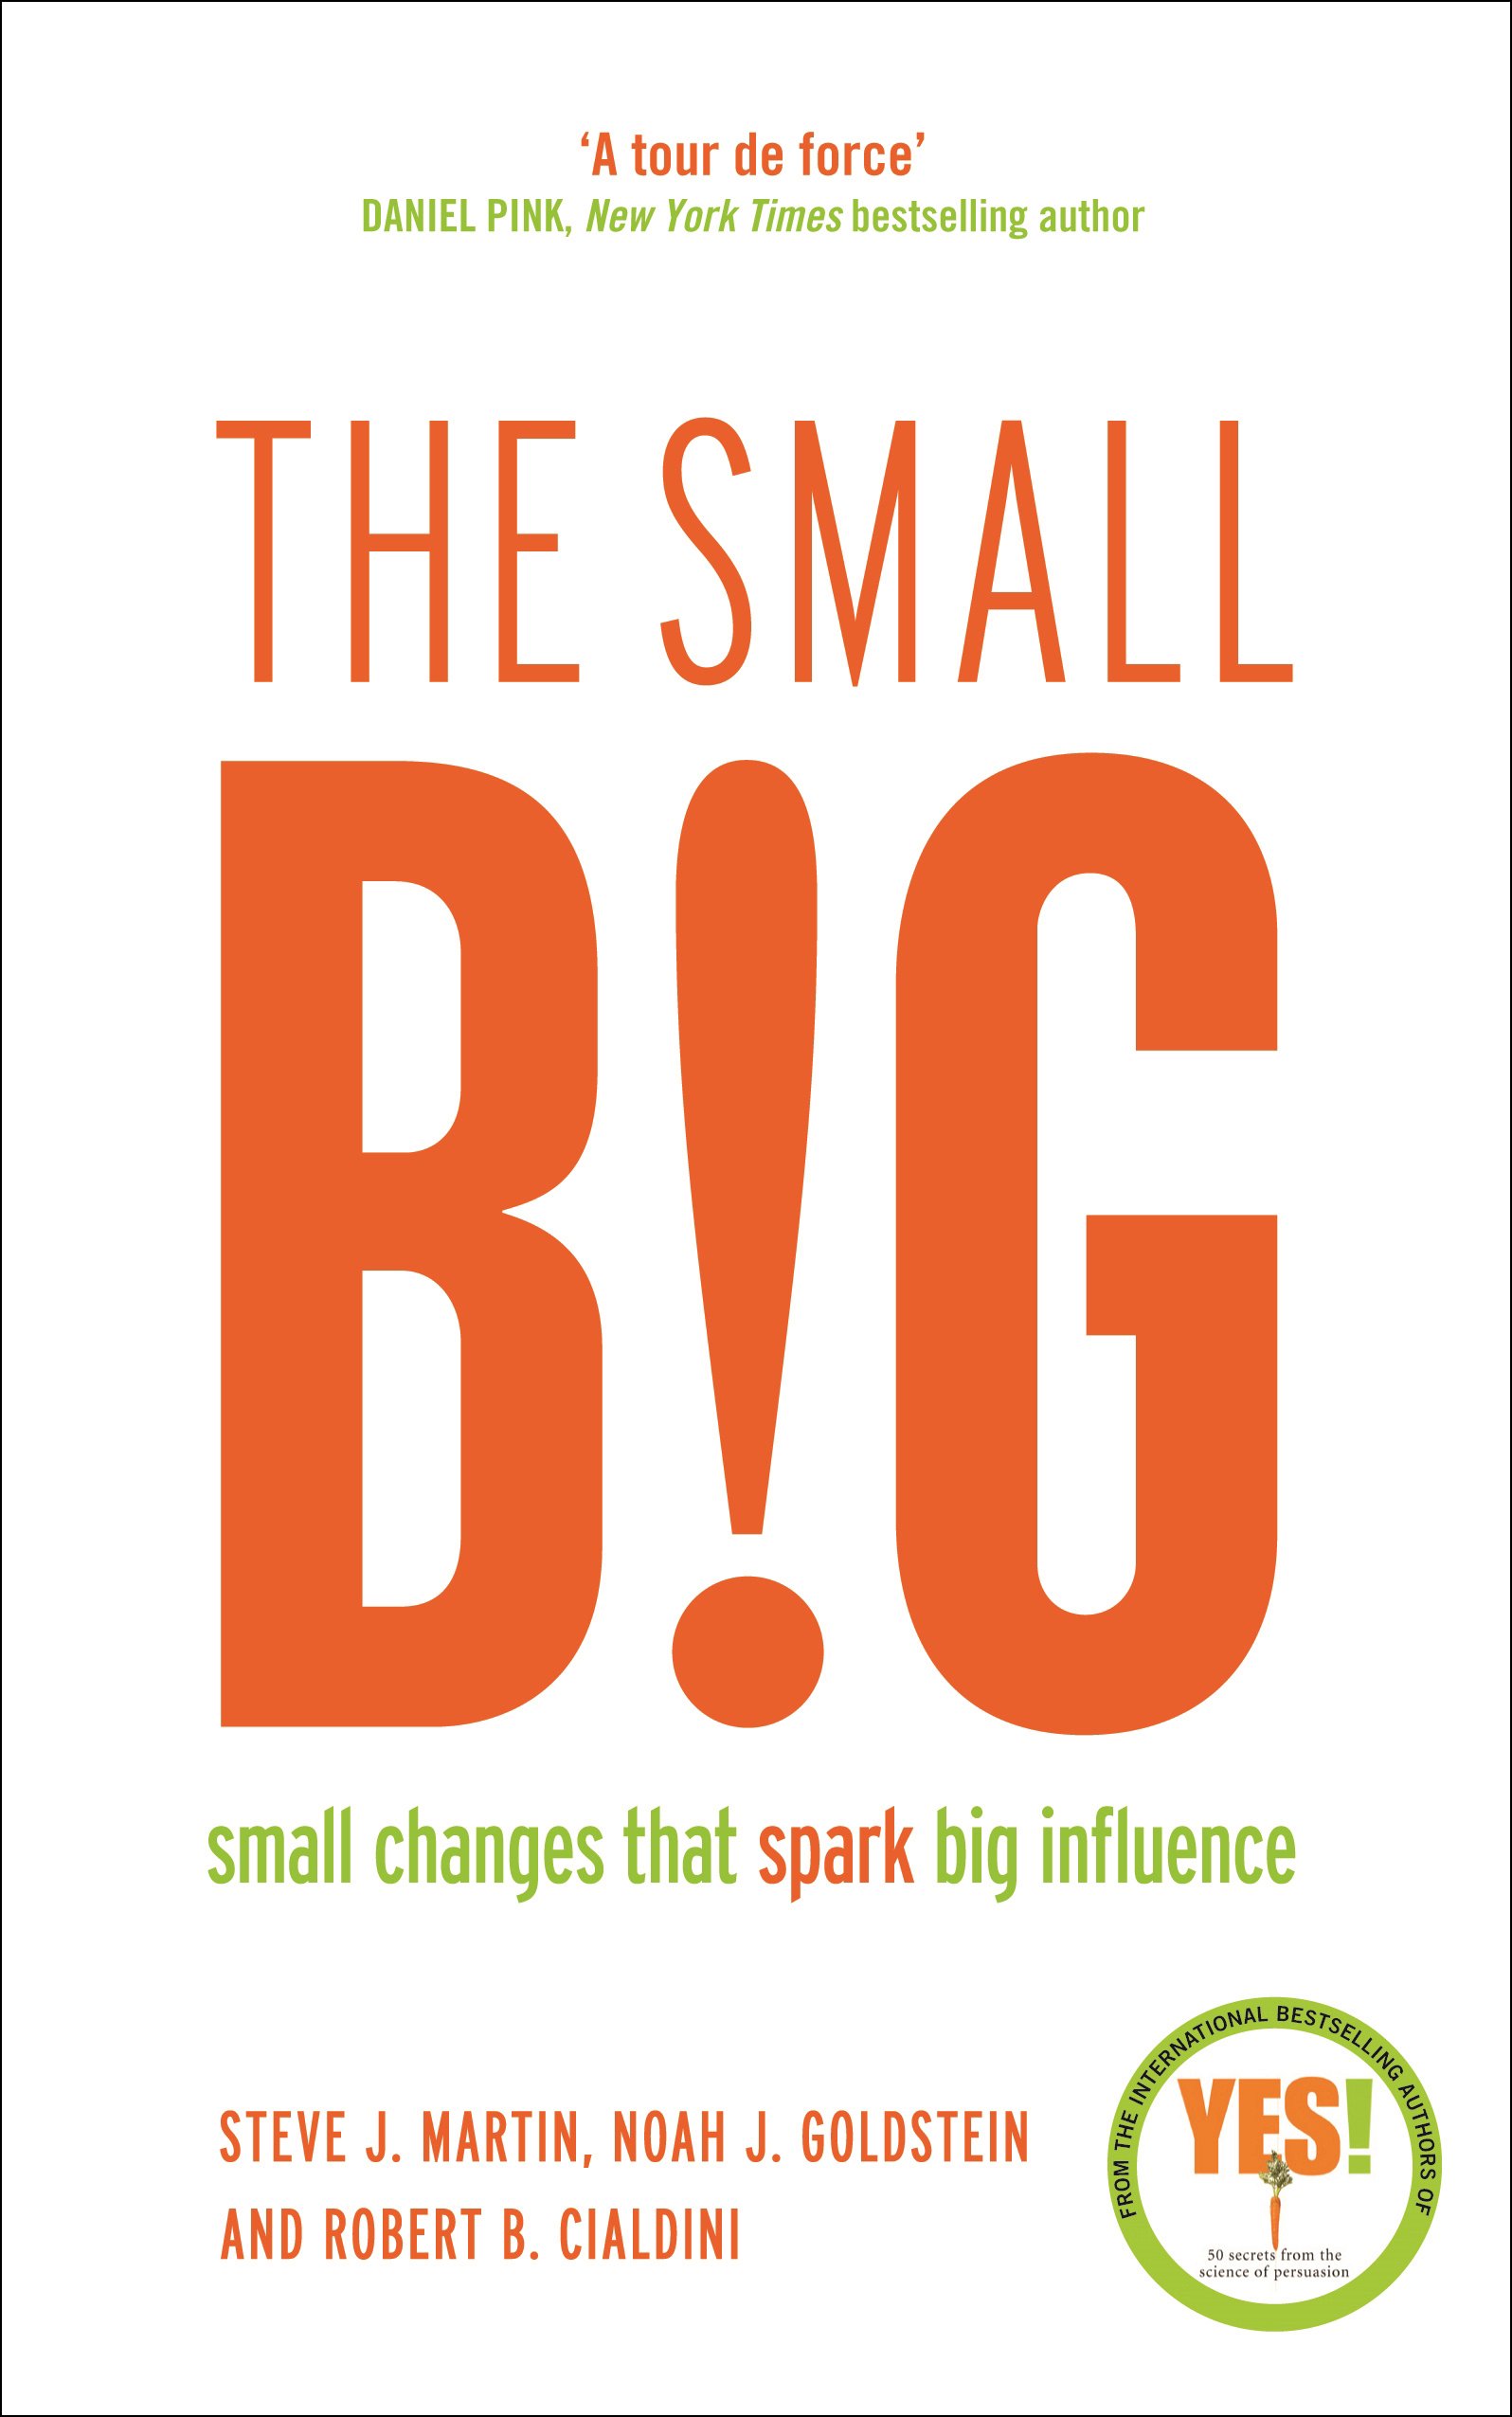 Book Review: “The small big – small changes that spark big influence” by Steve J Martin, Noah J Goldstein and Robert B Cialdini